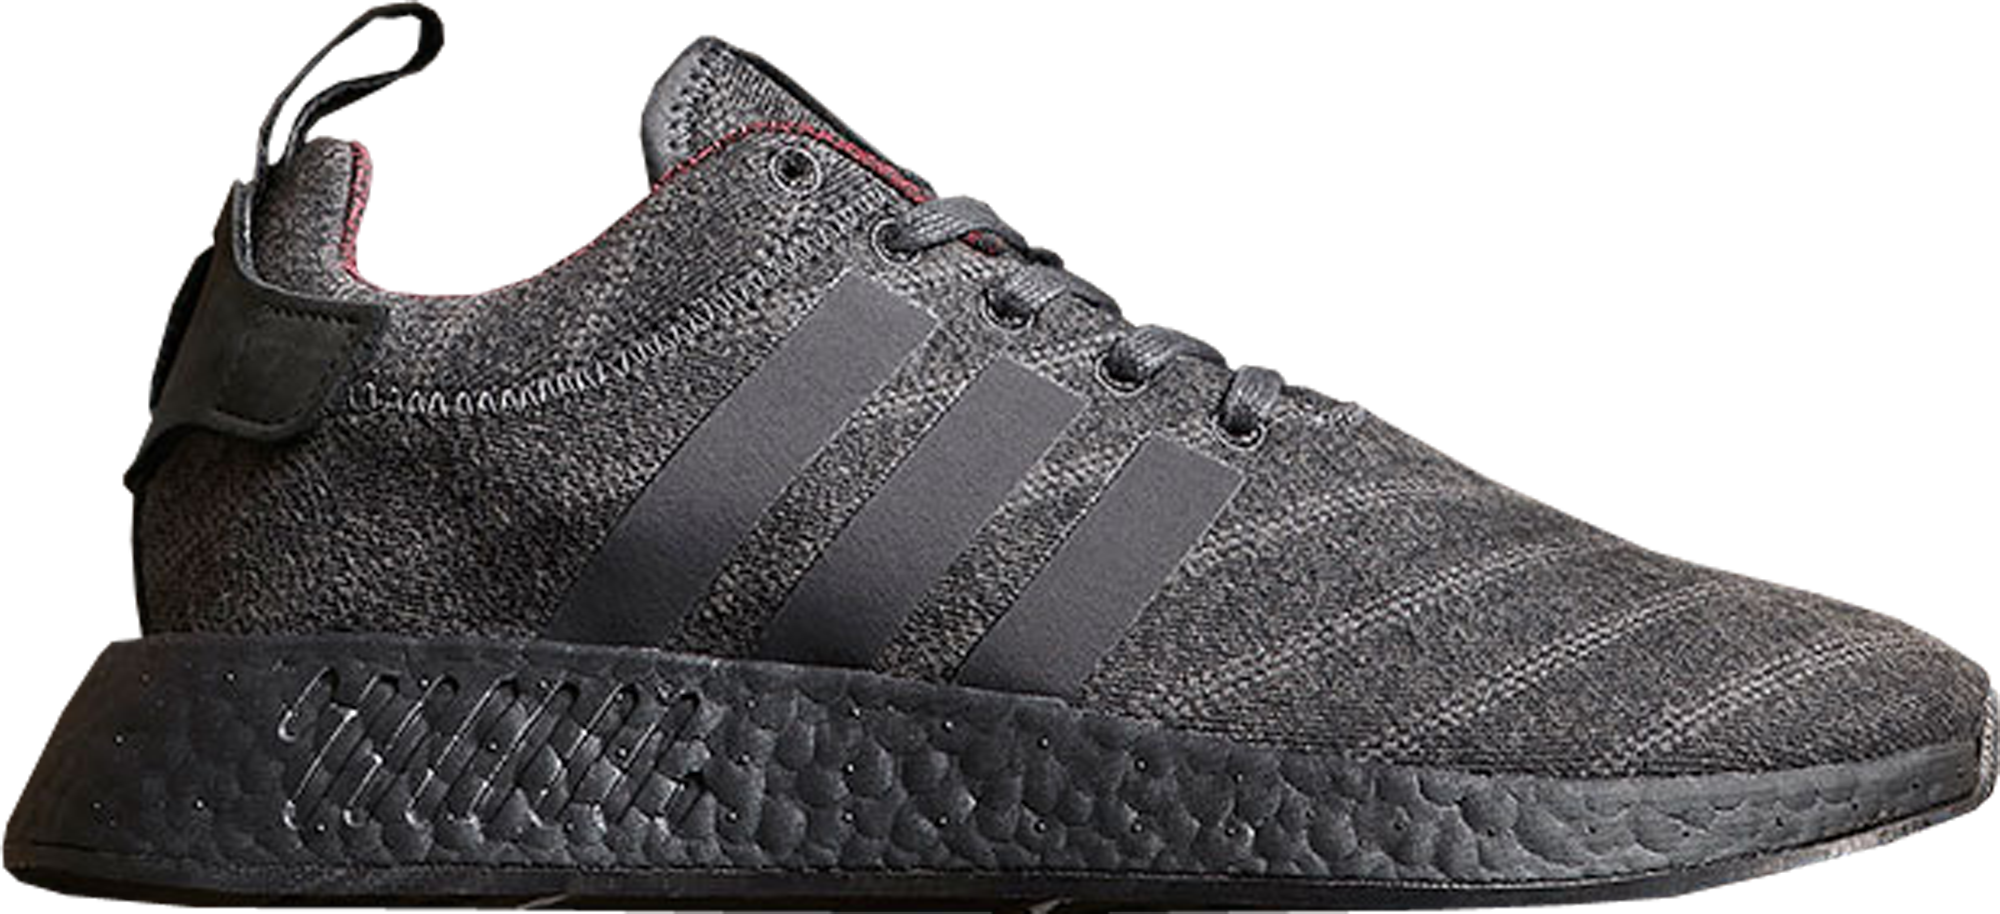 adidas NMD R2 Size? Henry Poole - CQ2015